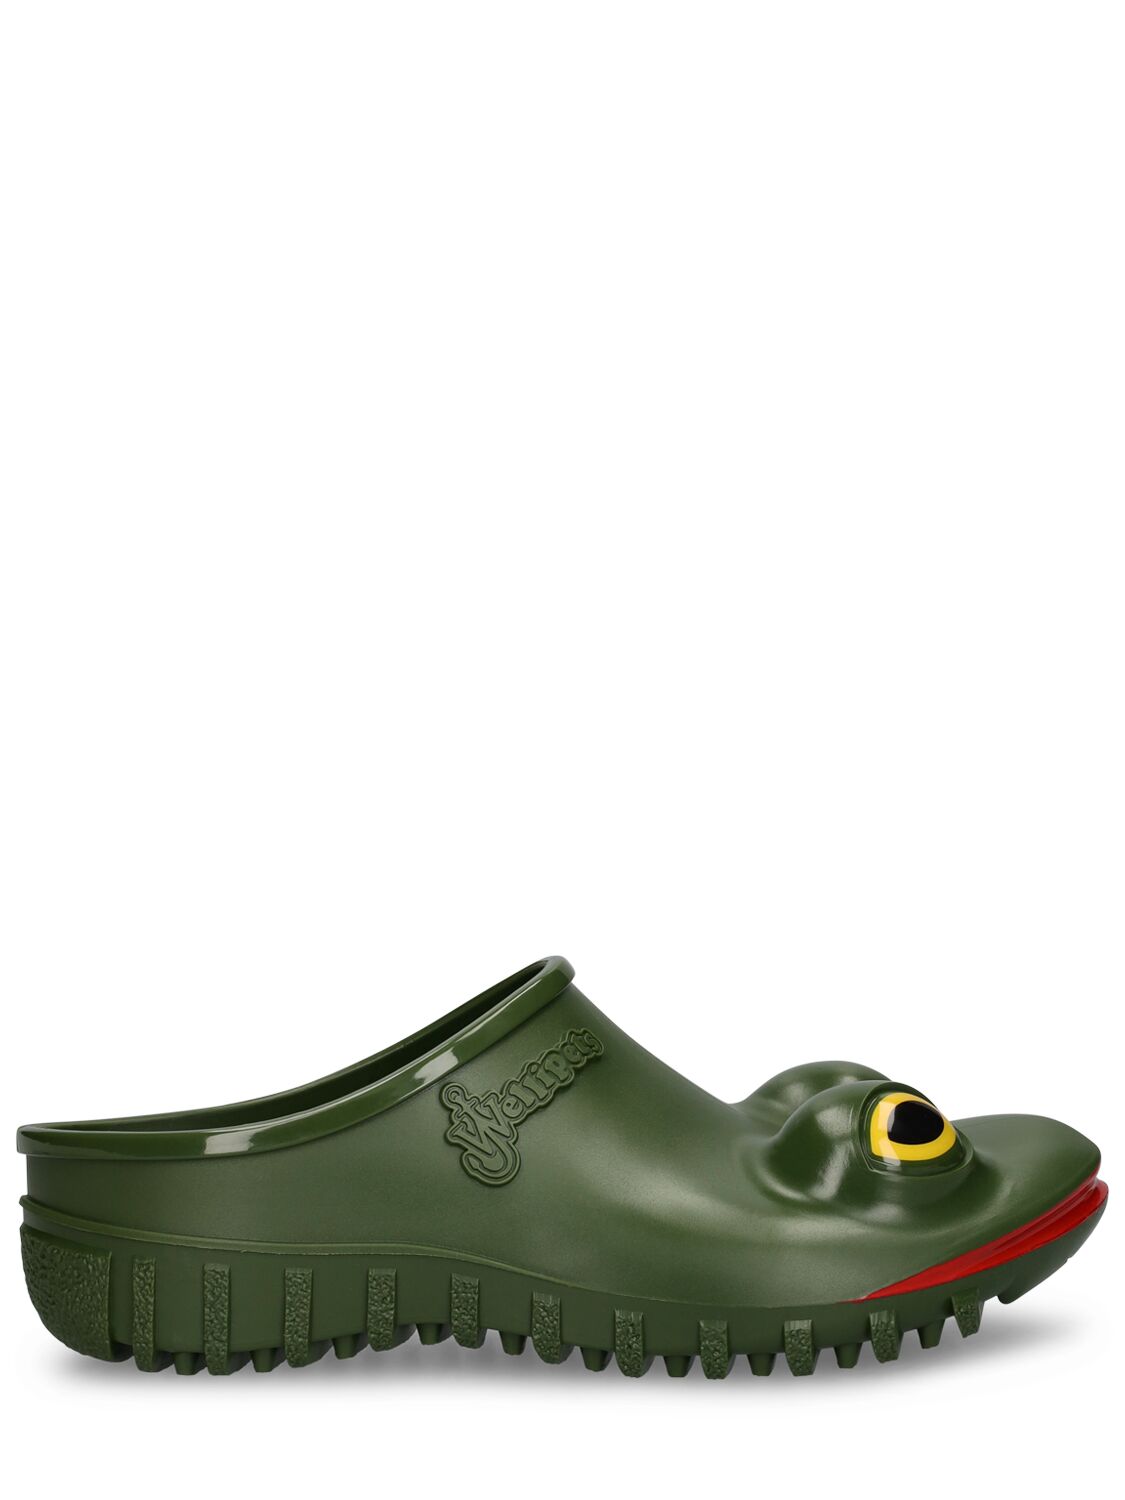 Image of Jw Anderson X Wellipets Frog Clogs